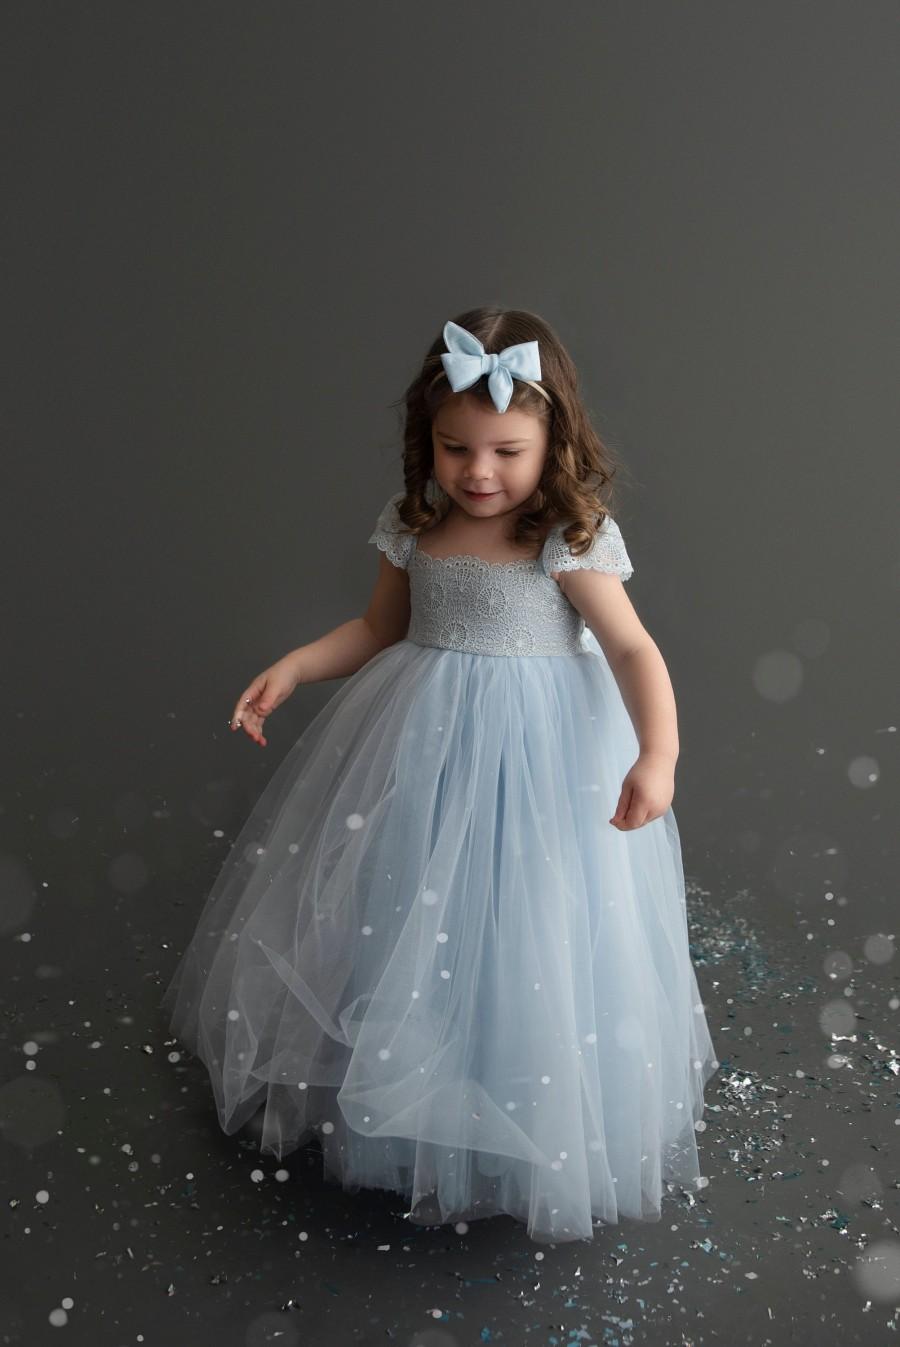 Wedding - Tulip Light Blue Flower Girl Dress Dresses Ice Outfit Girls Tulle Lace Newborn Princess 1st Birthday Tutu Baby Gown Photoshoot Infant Formal